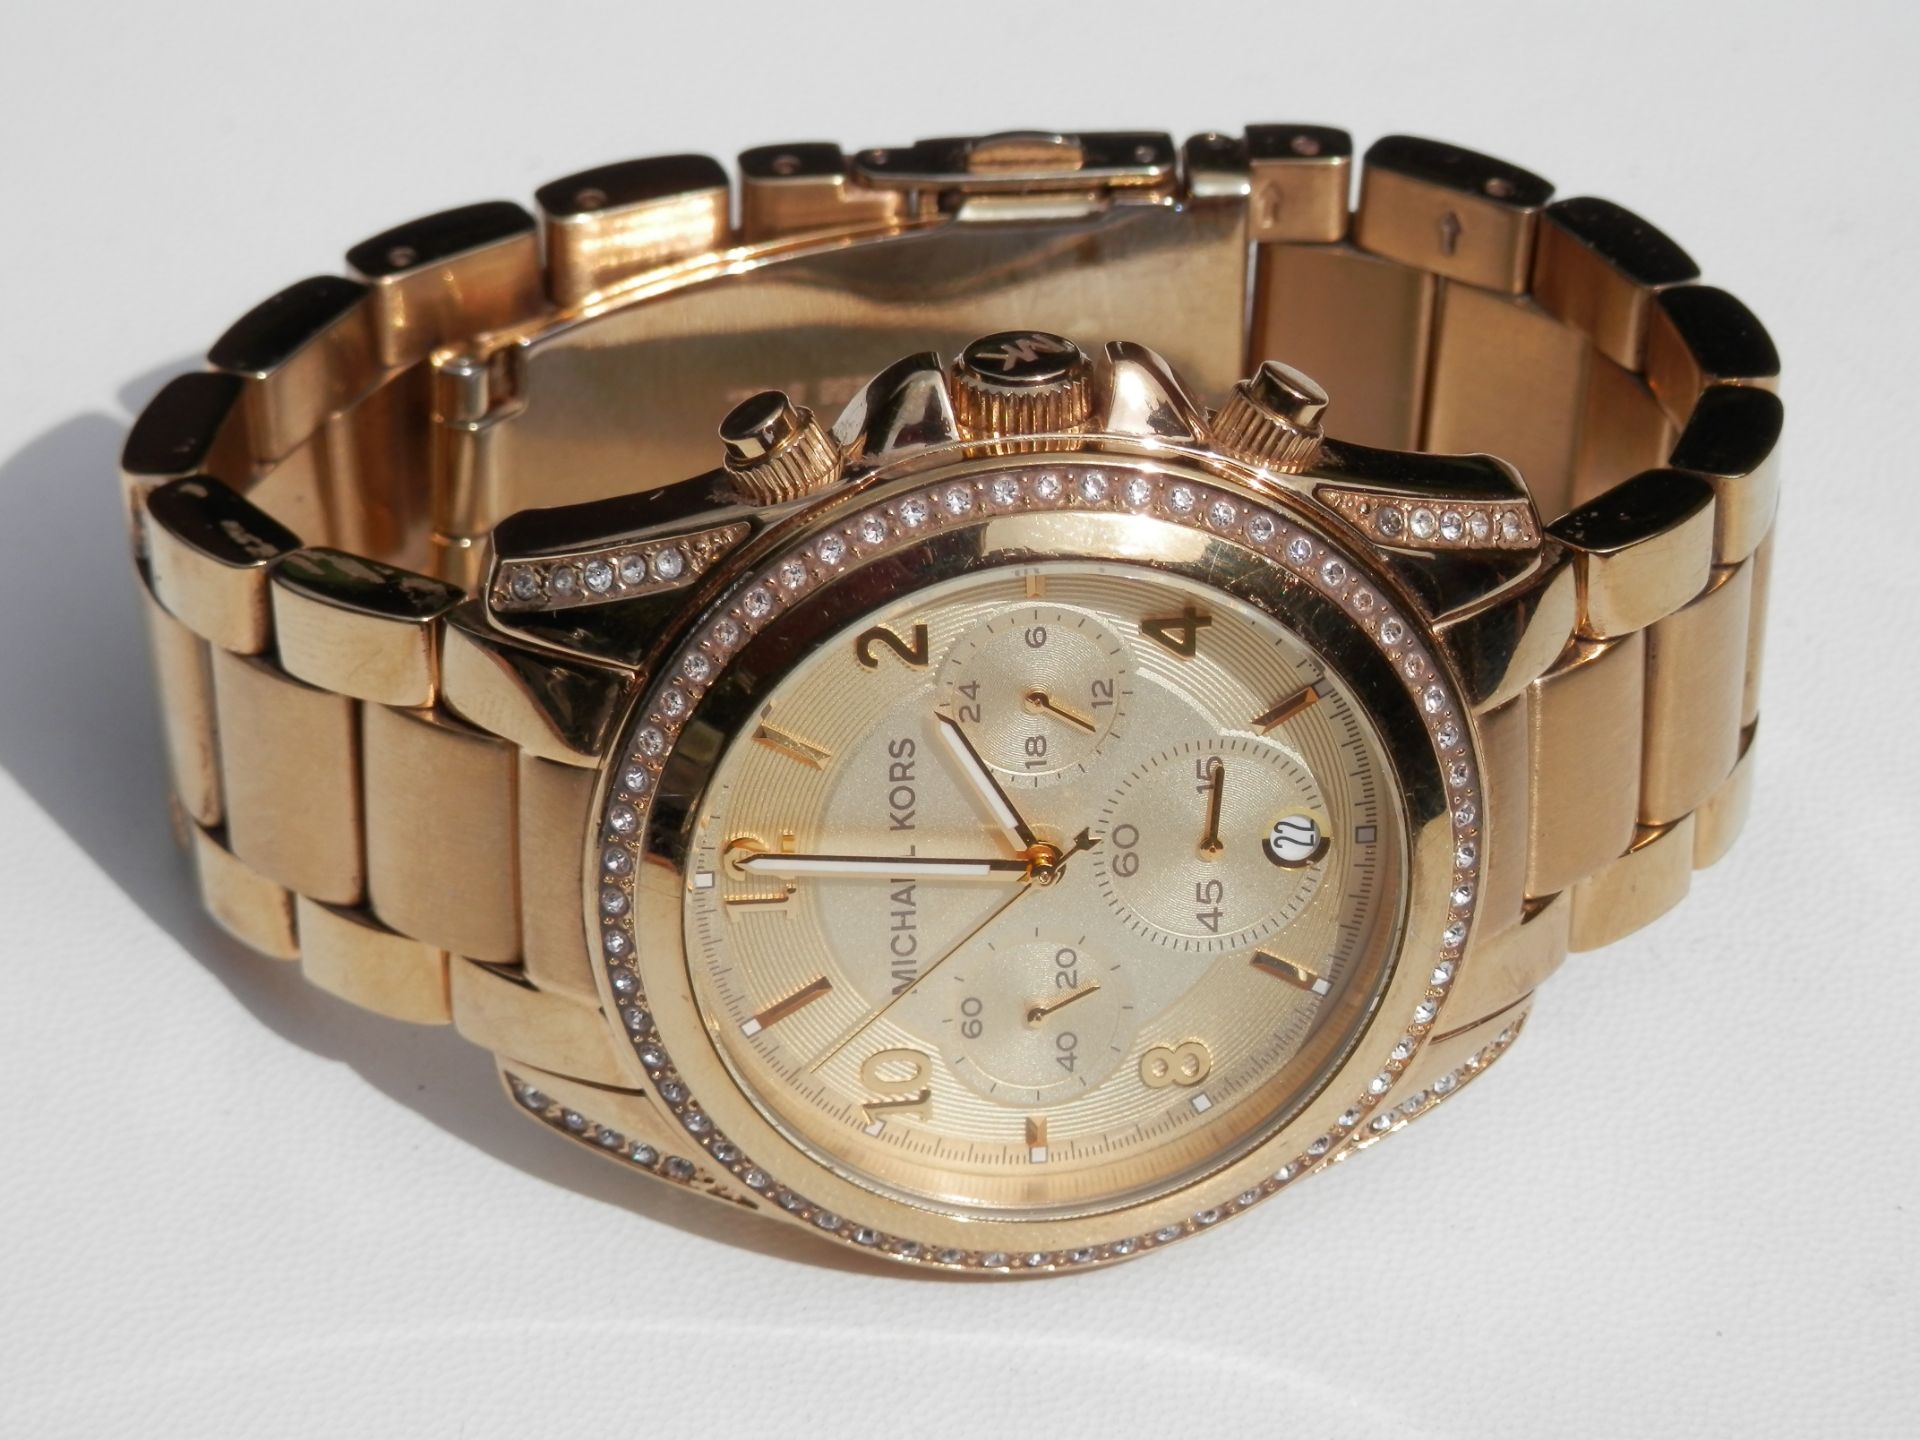 RRP £240. SUPERB LADIES MICHAEL KORS FULL STAINLESS GOLD PLATED DIAMANTE ENCRUSTED CHRONO DATE WATCH - Image 5 of 16